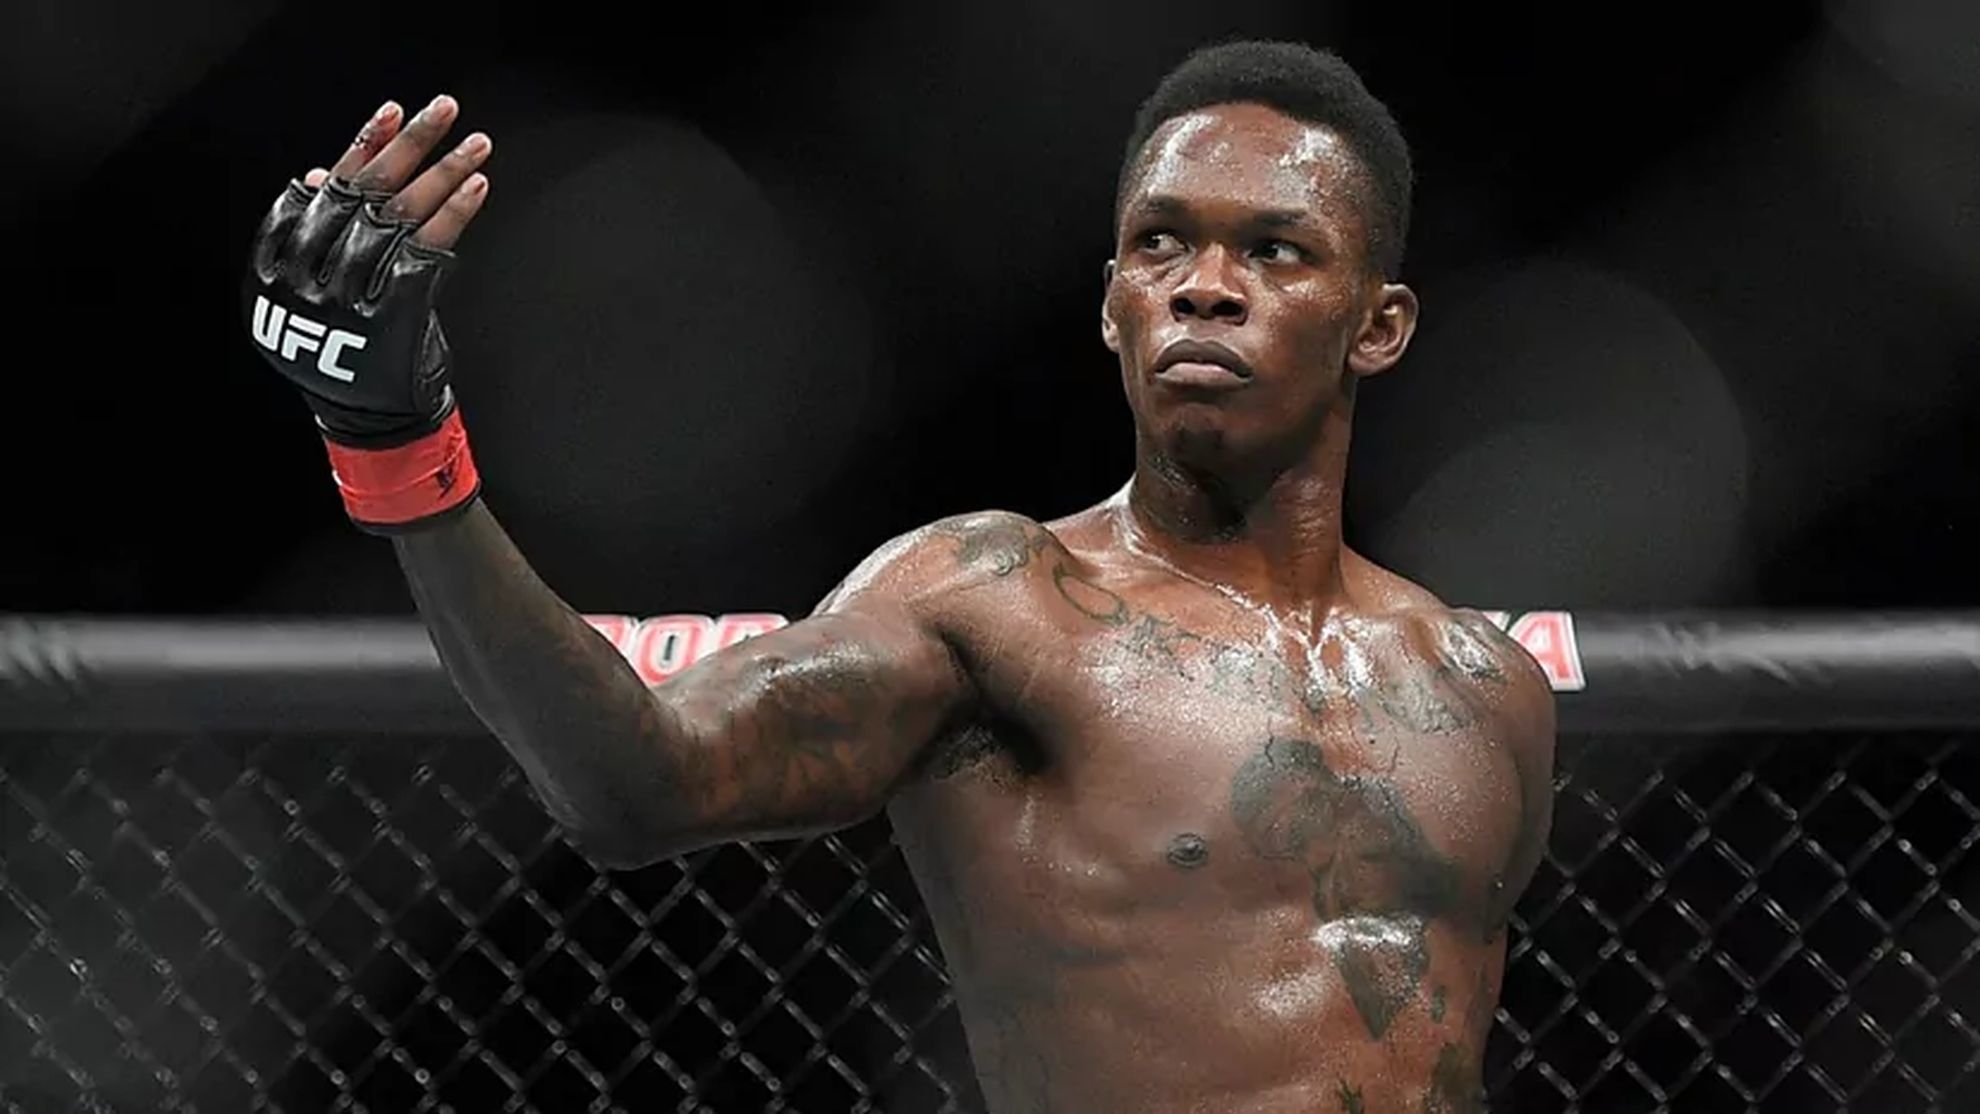 "Haters gonna hate, Izzy" Israel Adesanya's fans lash out at trolls